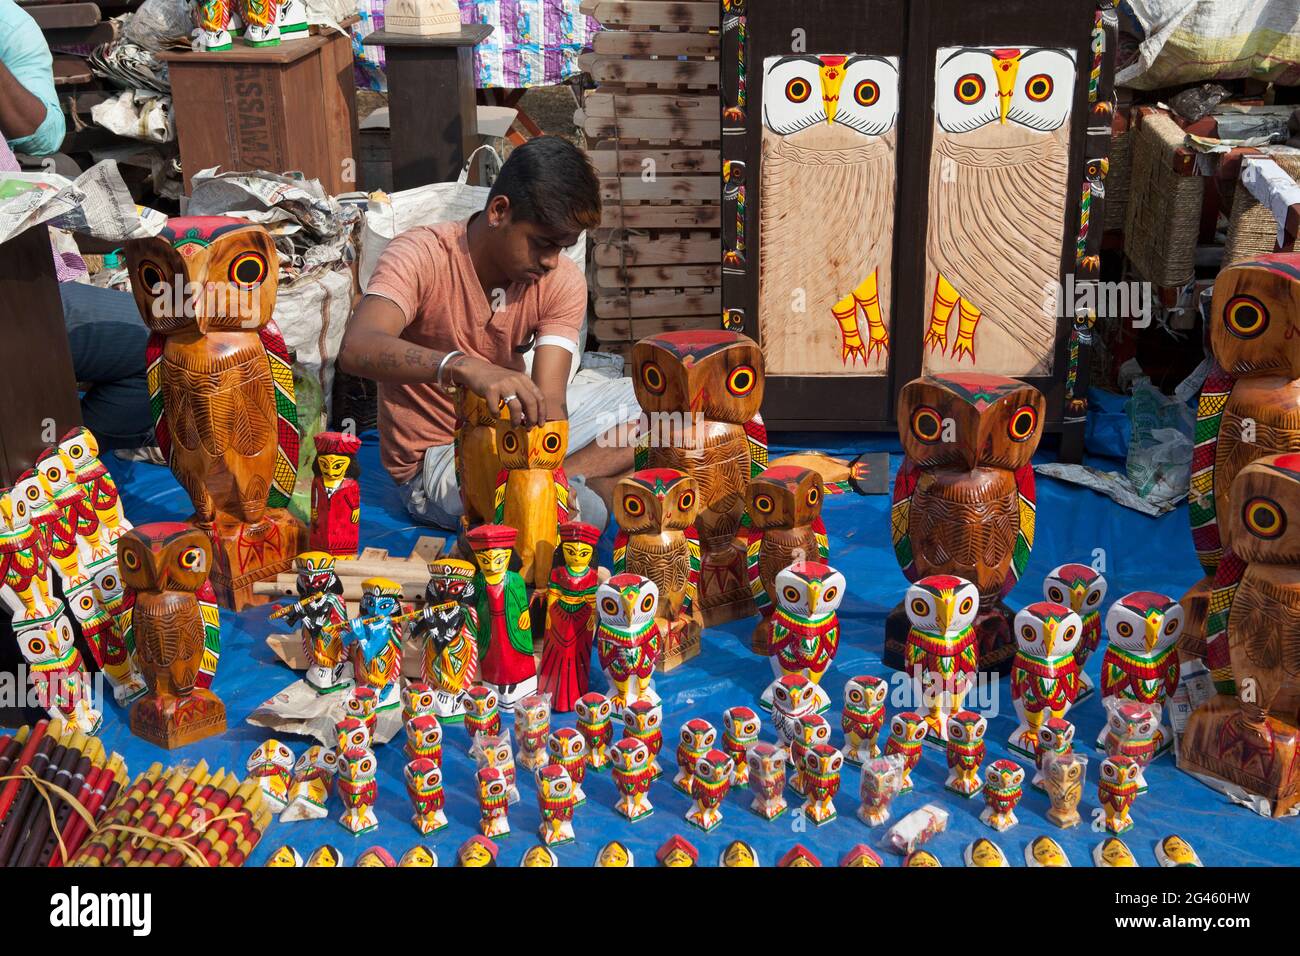 Stalls selling traditional wooden crafts in Poush Mela, a historical rural fair of about 127 years old at Shantiniketan, West Bengal, India. Stock Photo